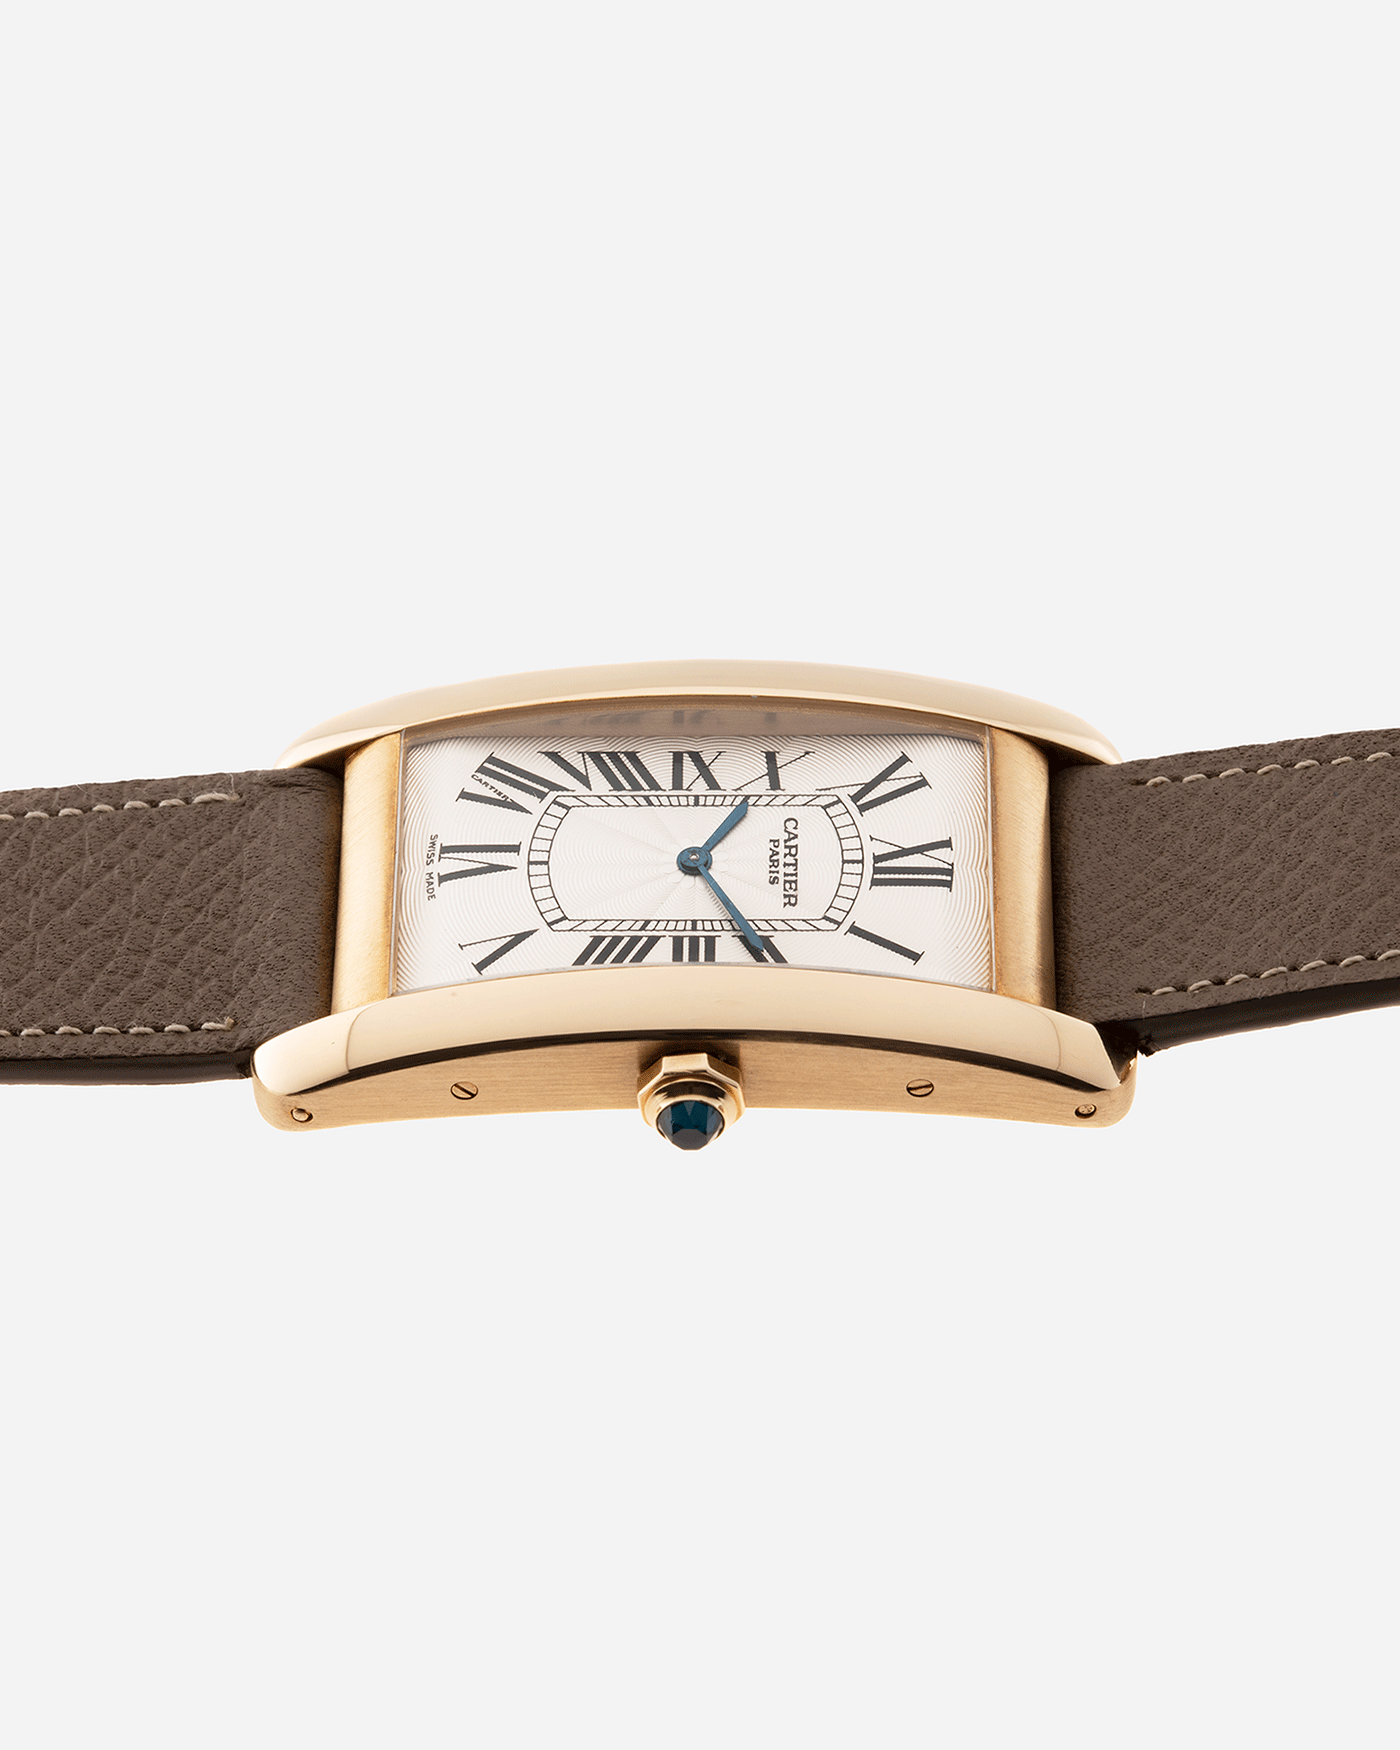 Brand: Cartier Year: 1999 Model: CPCP Collection Prive Tank Americaine Reference: 1737 Material: 18k Yellow Gold Movement: Cartier Caliber 430 MC Case Diameter: 45mmX26mm Strap: Nostime Taupe Grained Calf